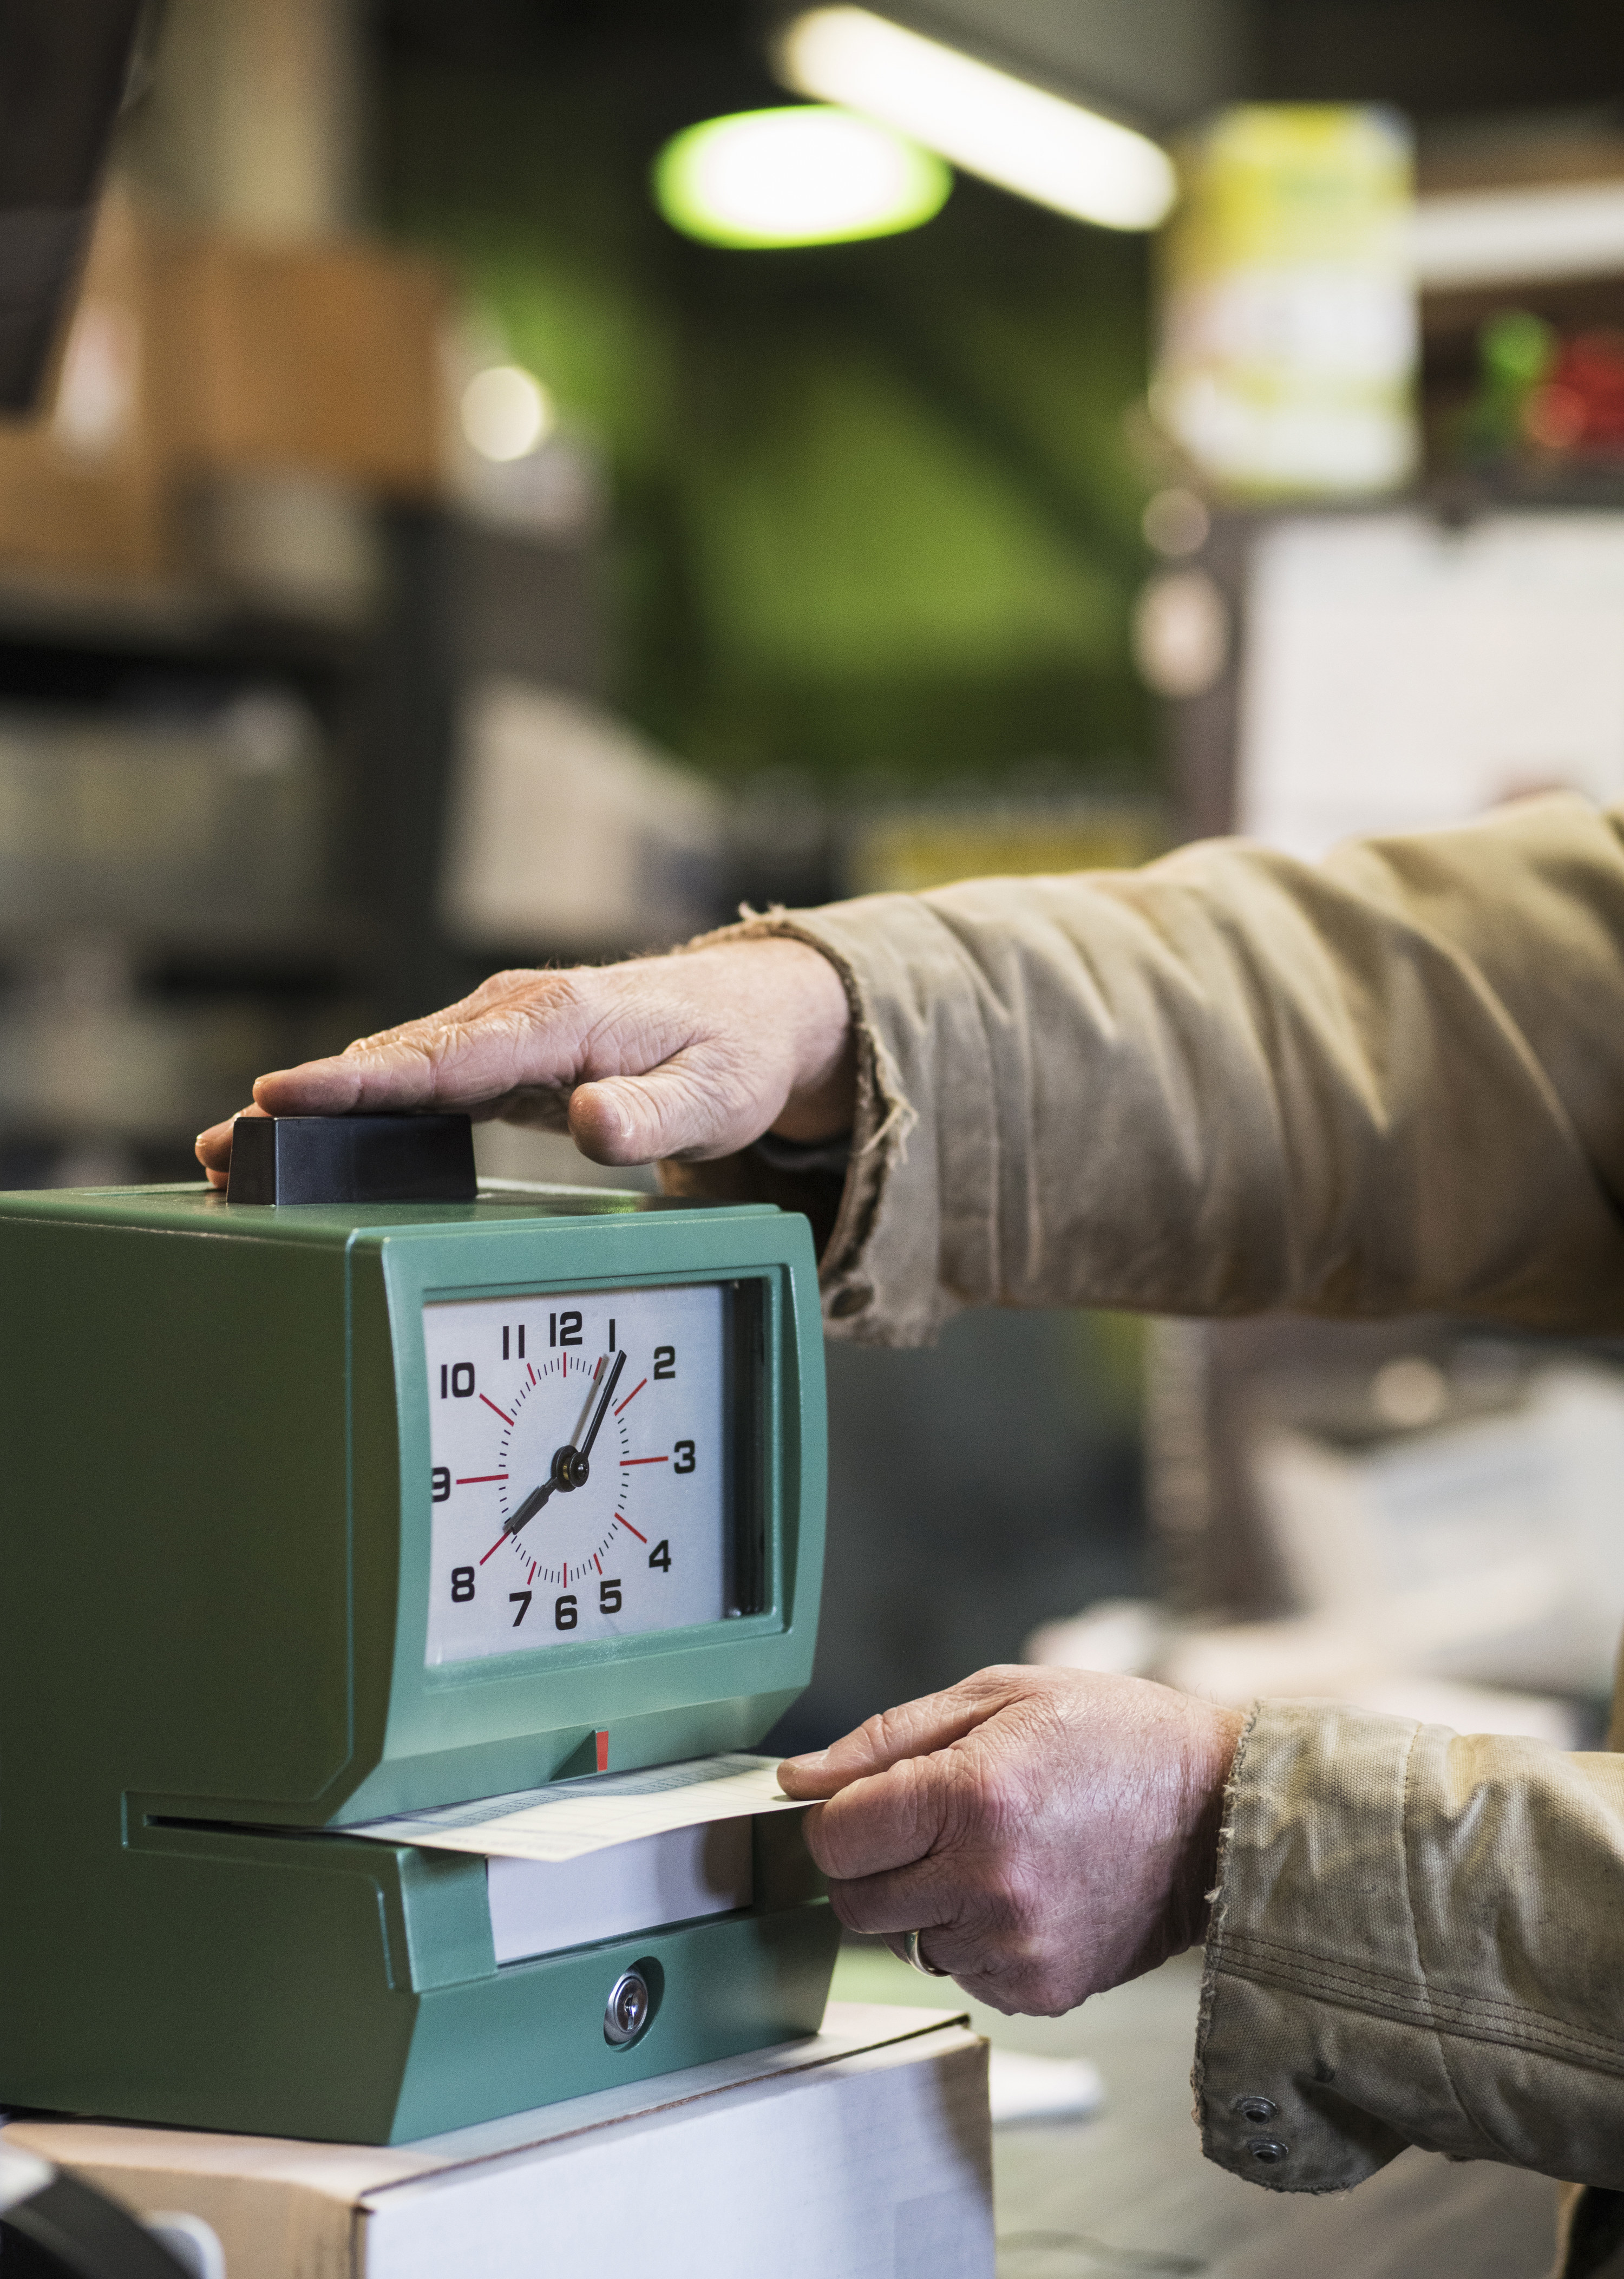 man clocking in using an old fashioned time clock machine